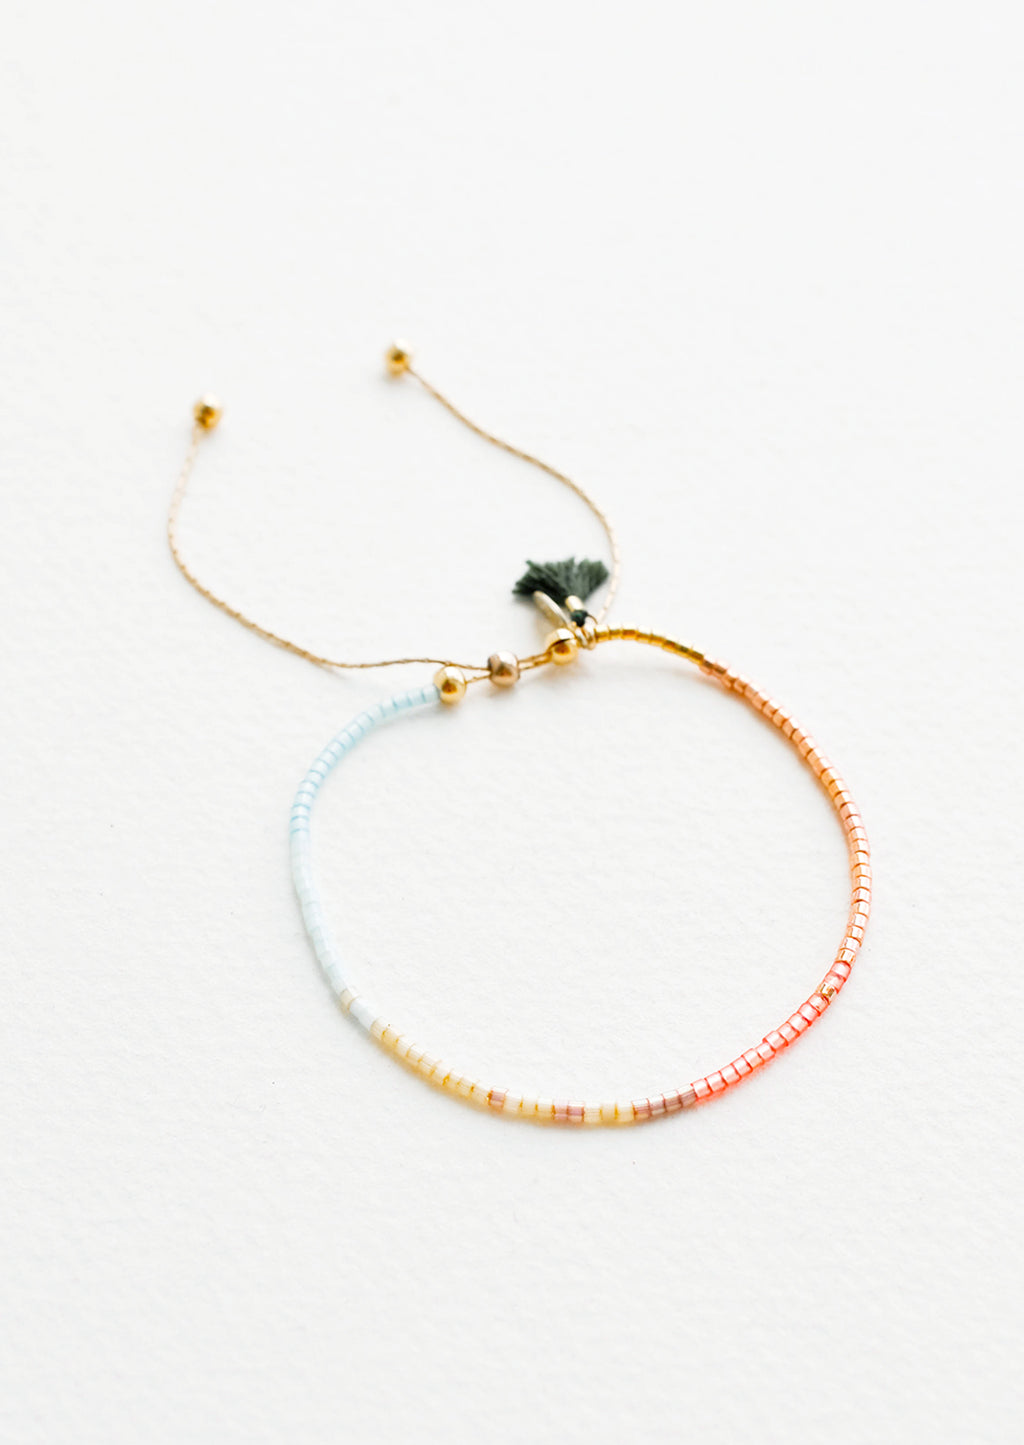 Copper / Sky Blue / Maize: Delicate bracelet of glass beads in a gradient from pale blue to deep rust on a thin gold chain.